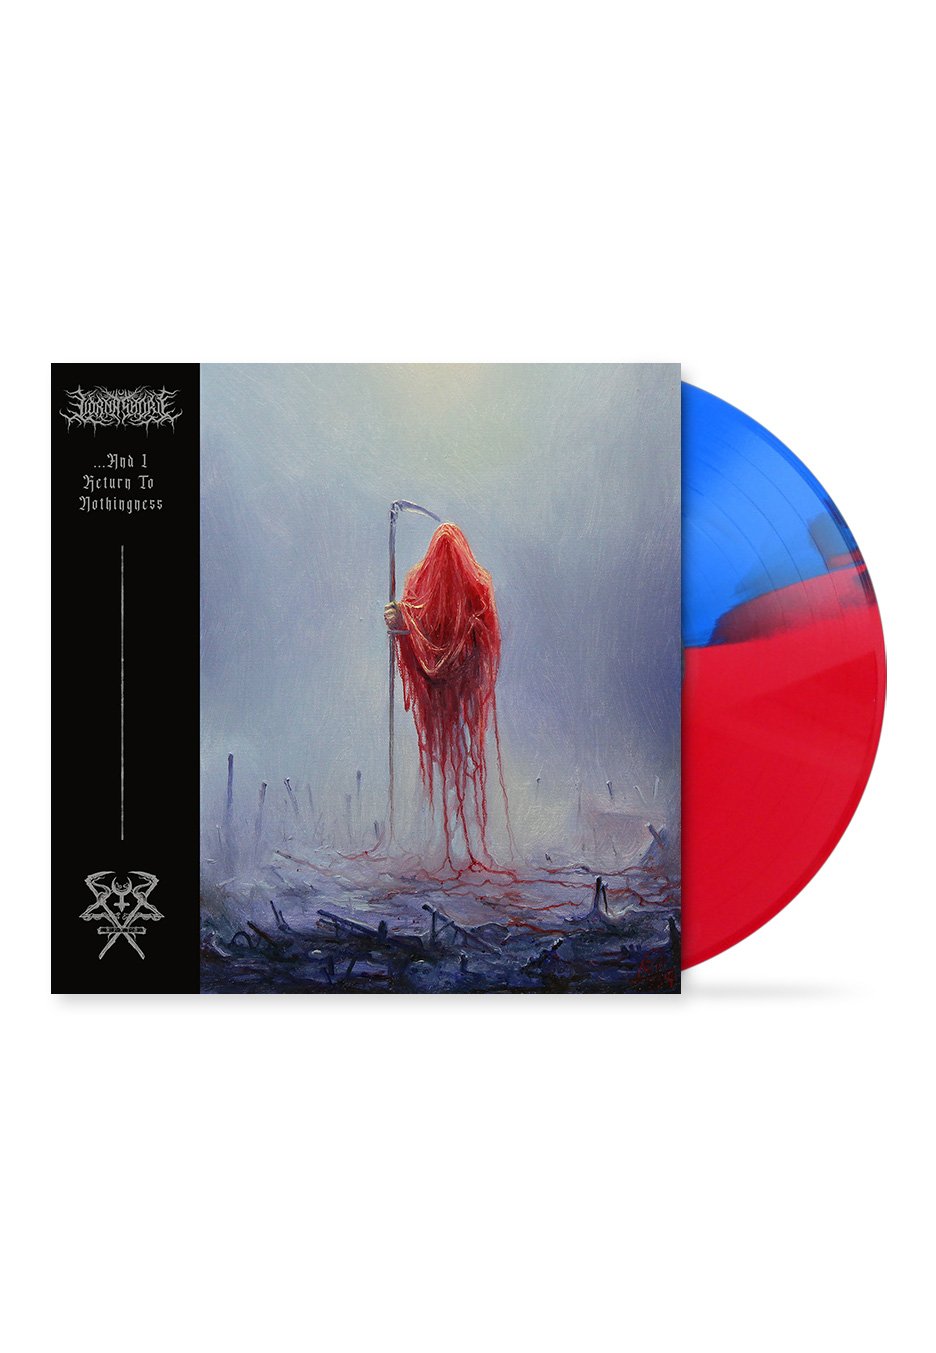 Lorna Shore - ...And I Return To Nothingness EP Ltd. Sky Blue Red Split - Colored Vinyl + CD